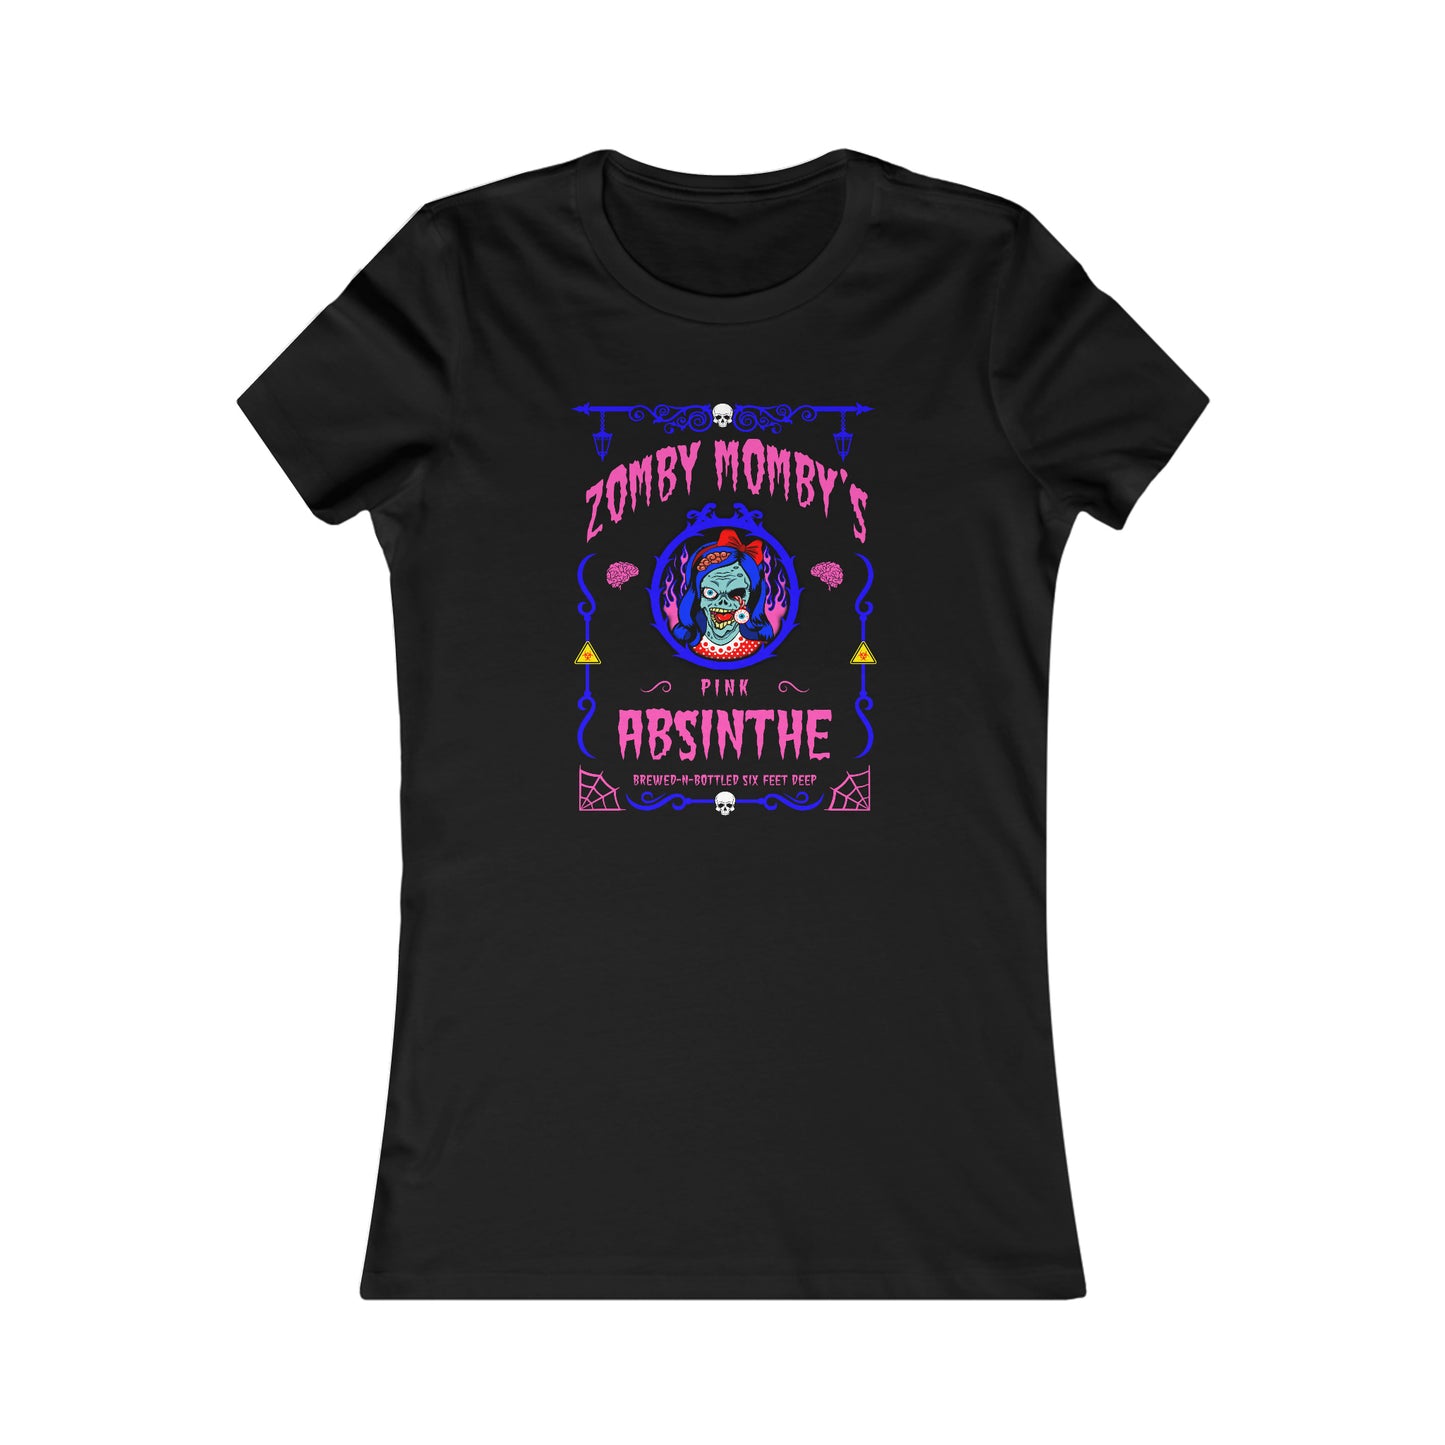 ABSINTHE MONSTERS 12 (ZOMBY MOMBY) Women's Favorite Tee